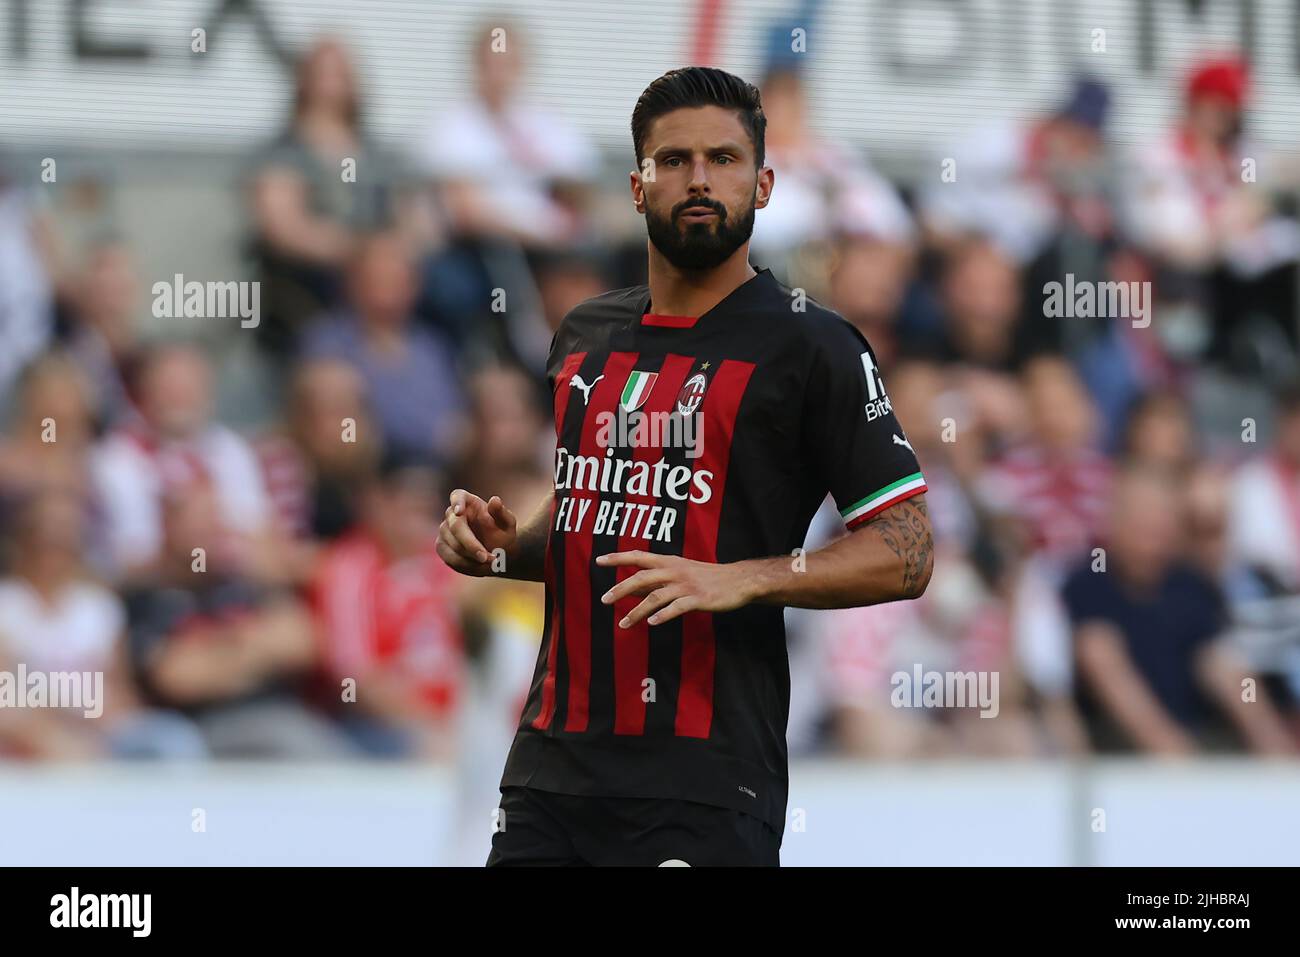 Cologne, Germany. 07th June, 2022. Telekom Cup, 1. FC Cologne vs AC Milan, Olivier Giroud (Milan) Credit: Juergen Schwarz/Alamy Live News Stock Photo